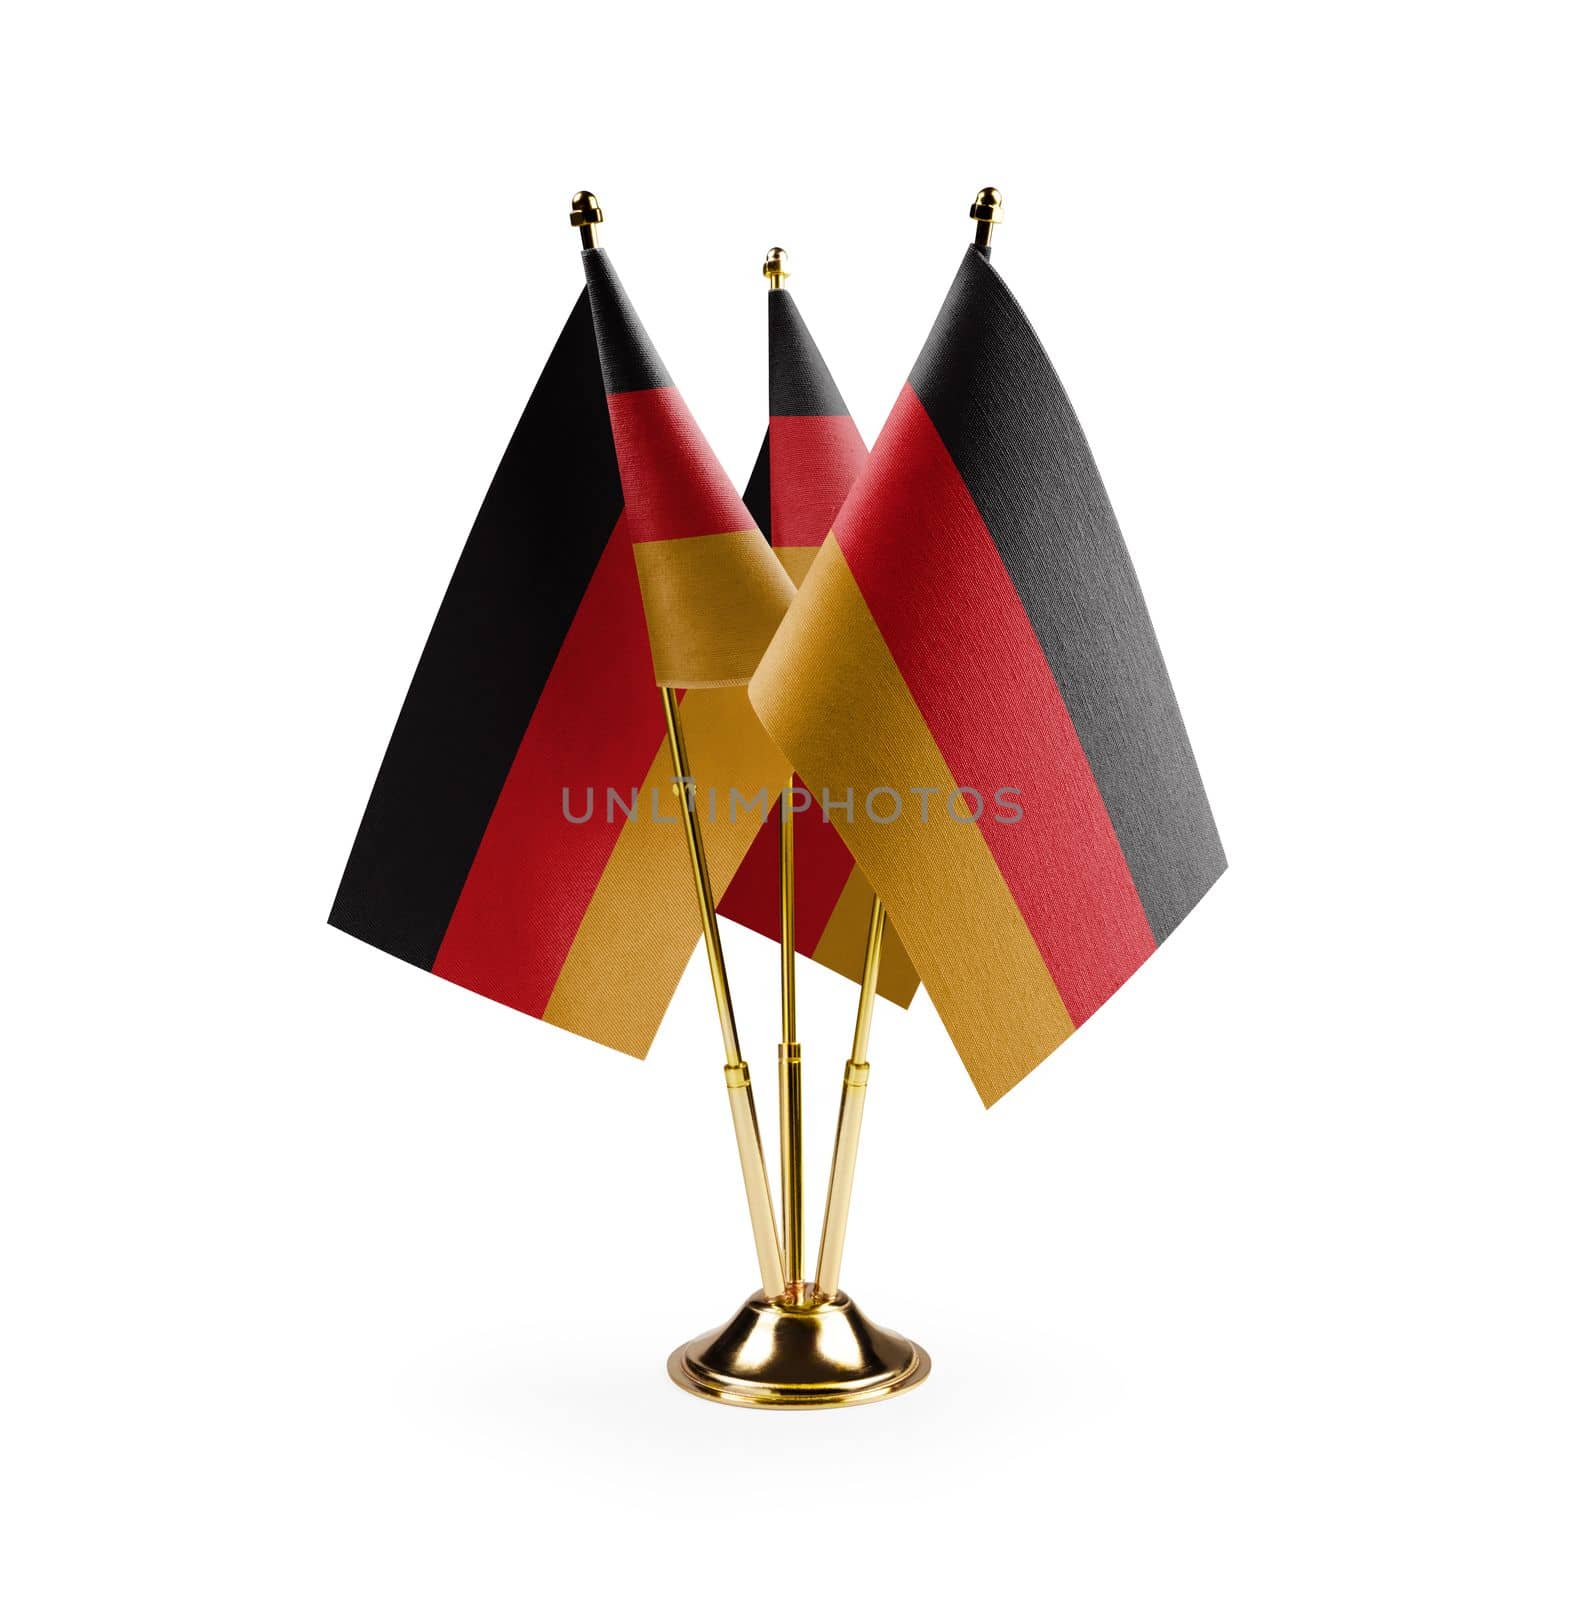 Small national flags of the Germany on a white background.